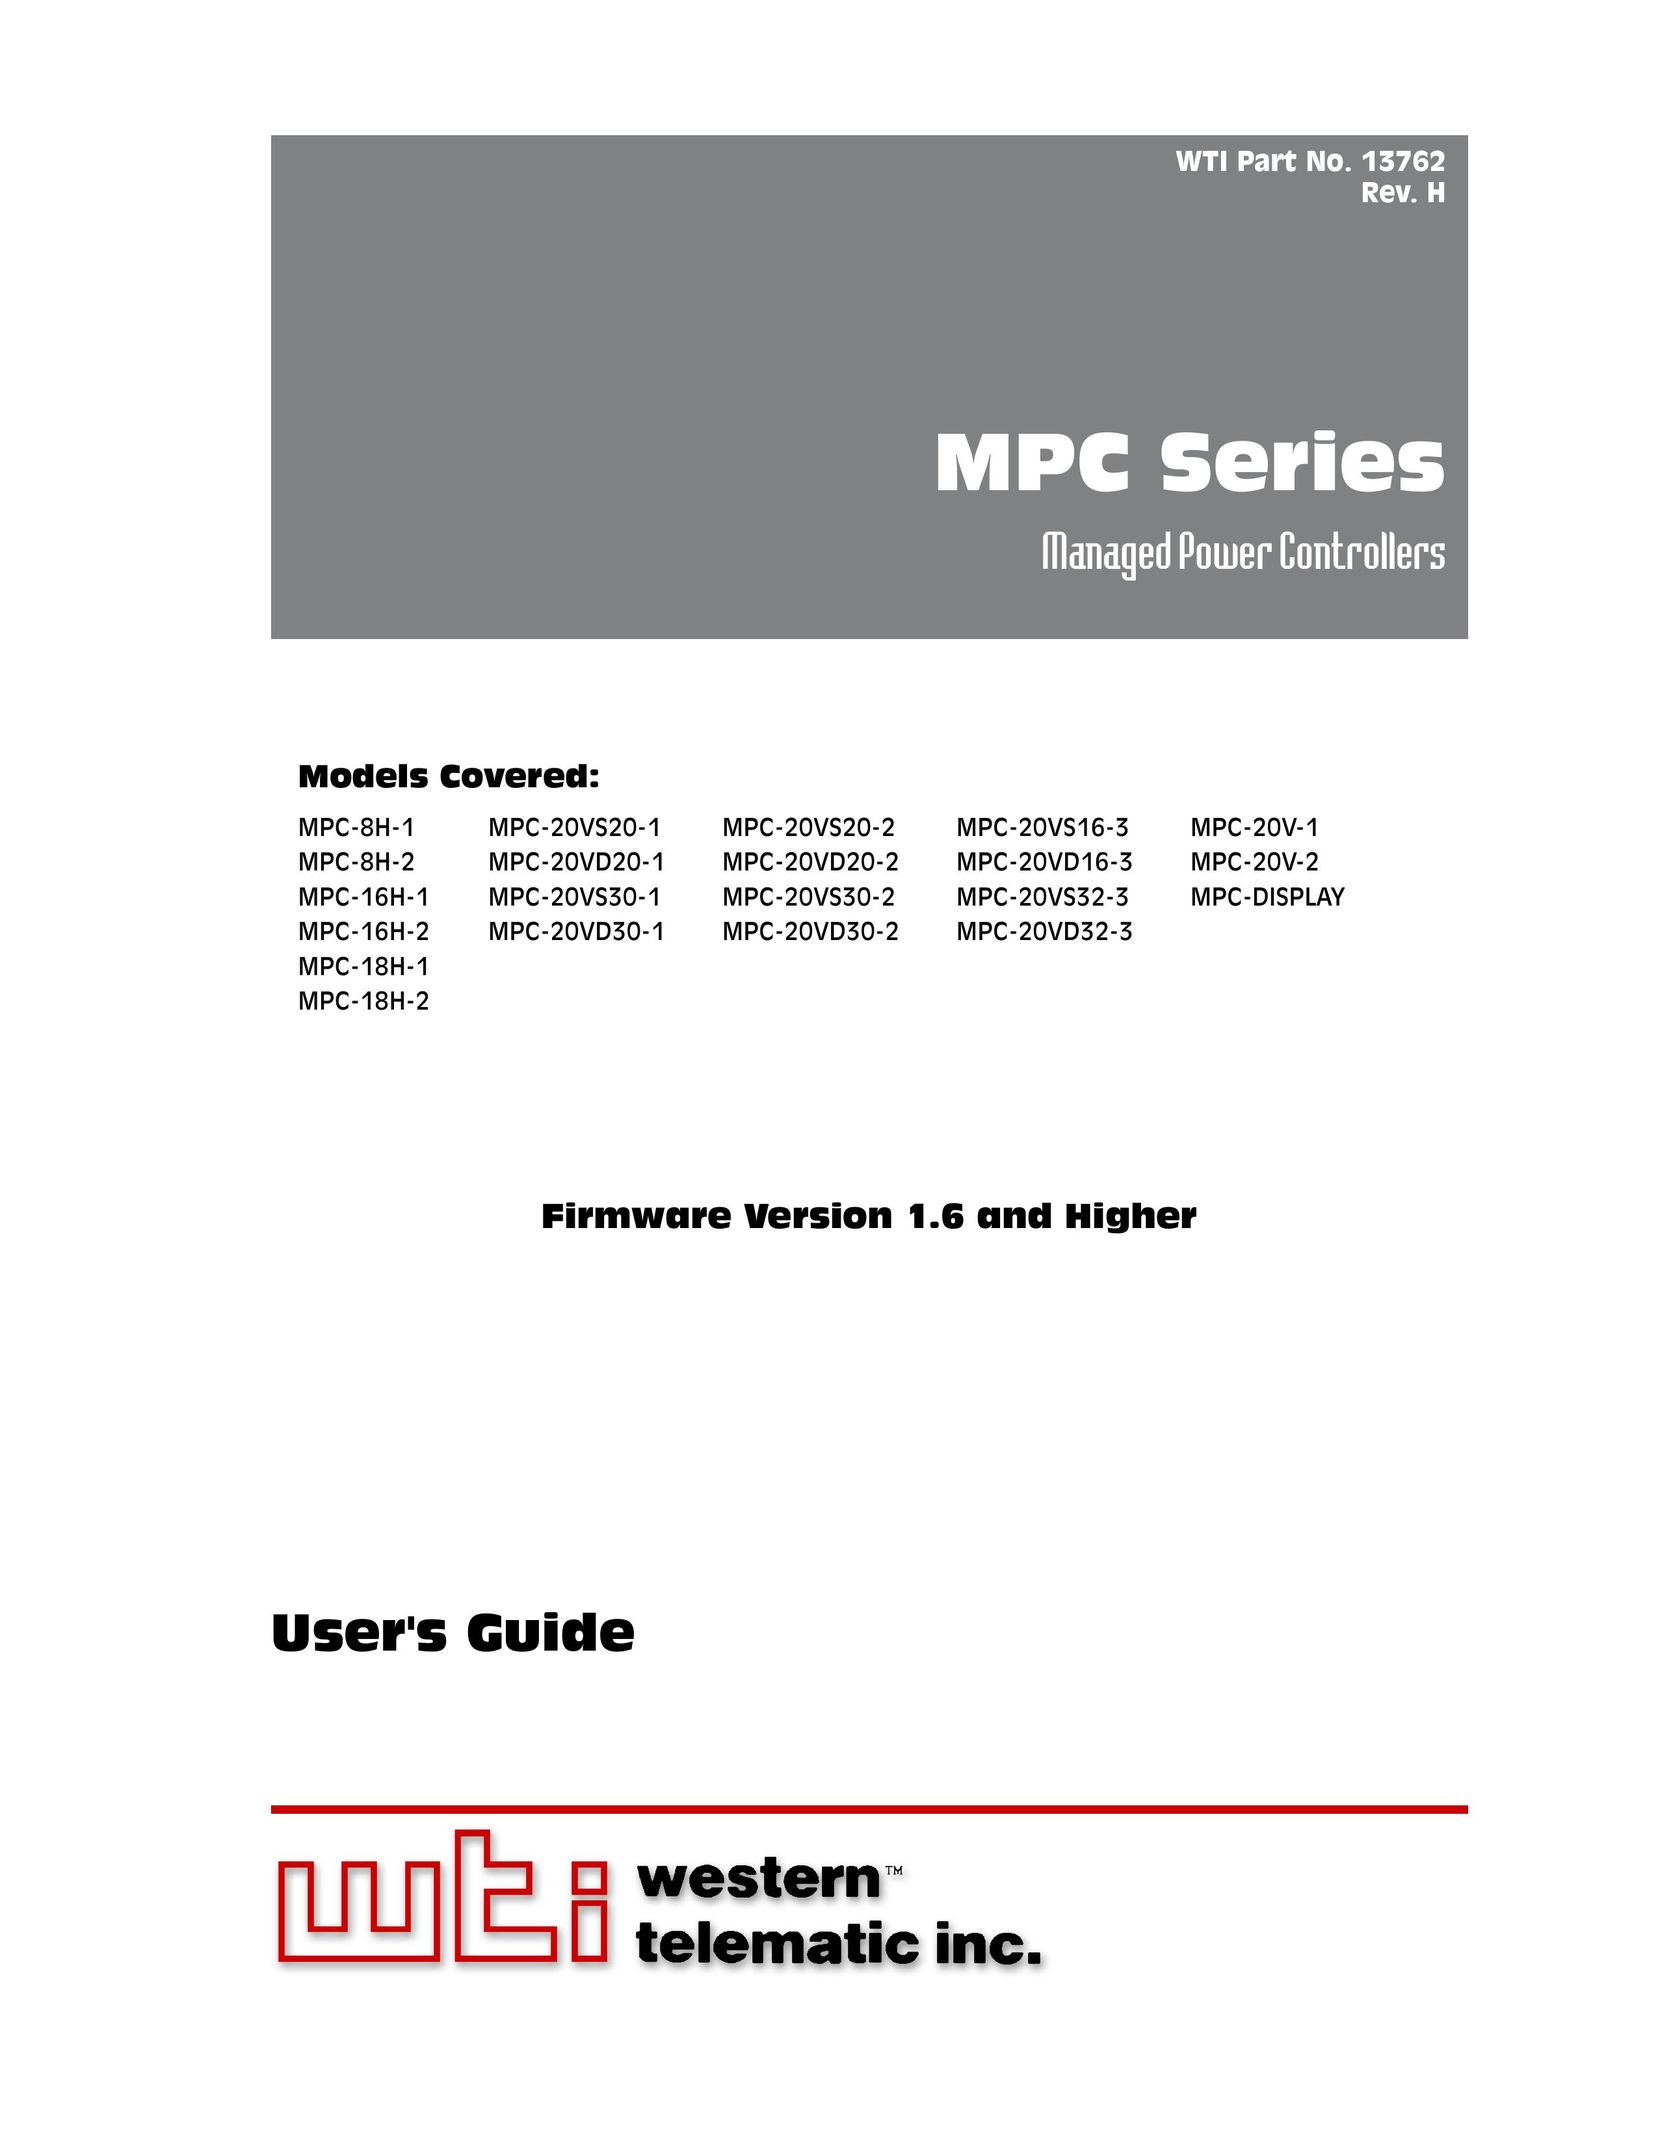 Western Telematic MPC-20VD16-3 Network Card User Manual